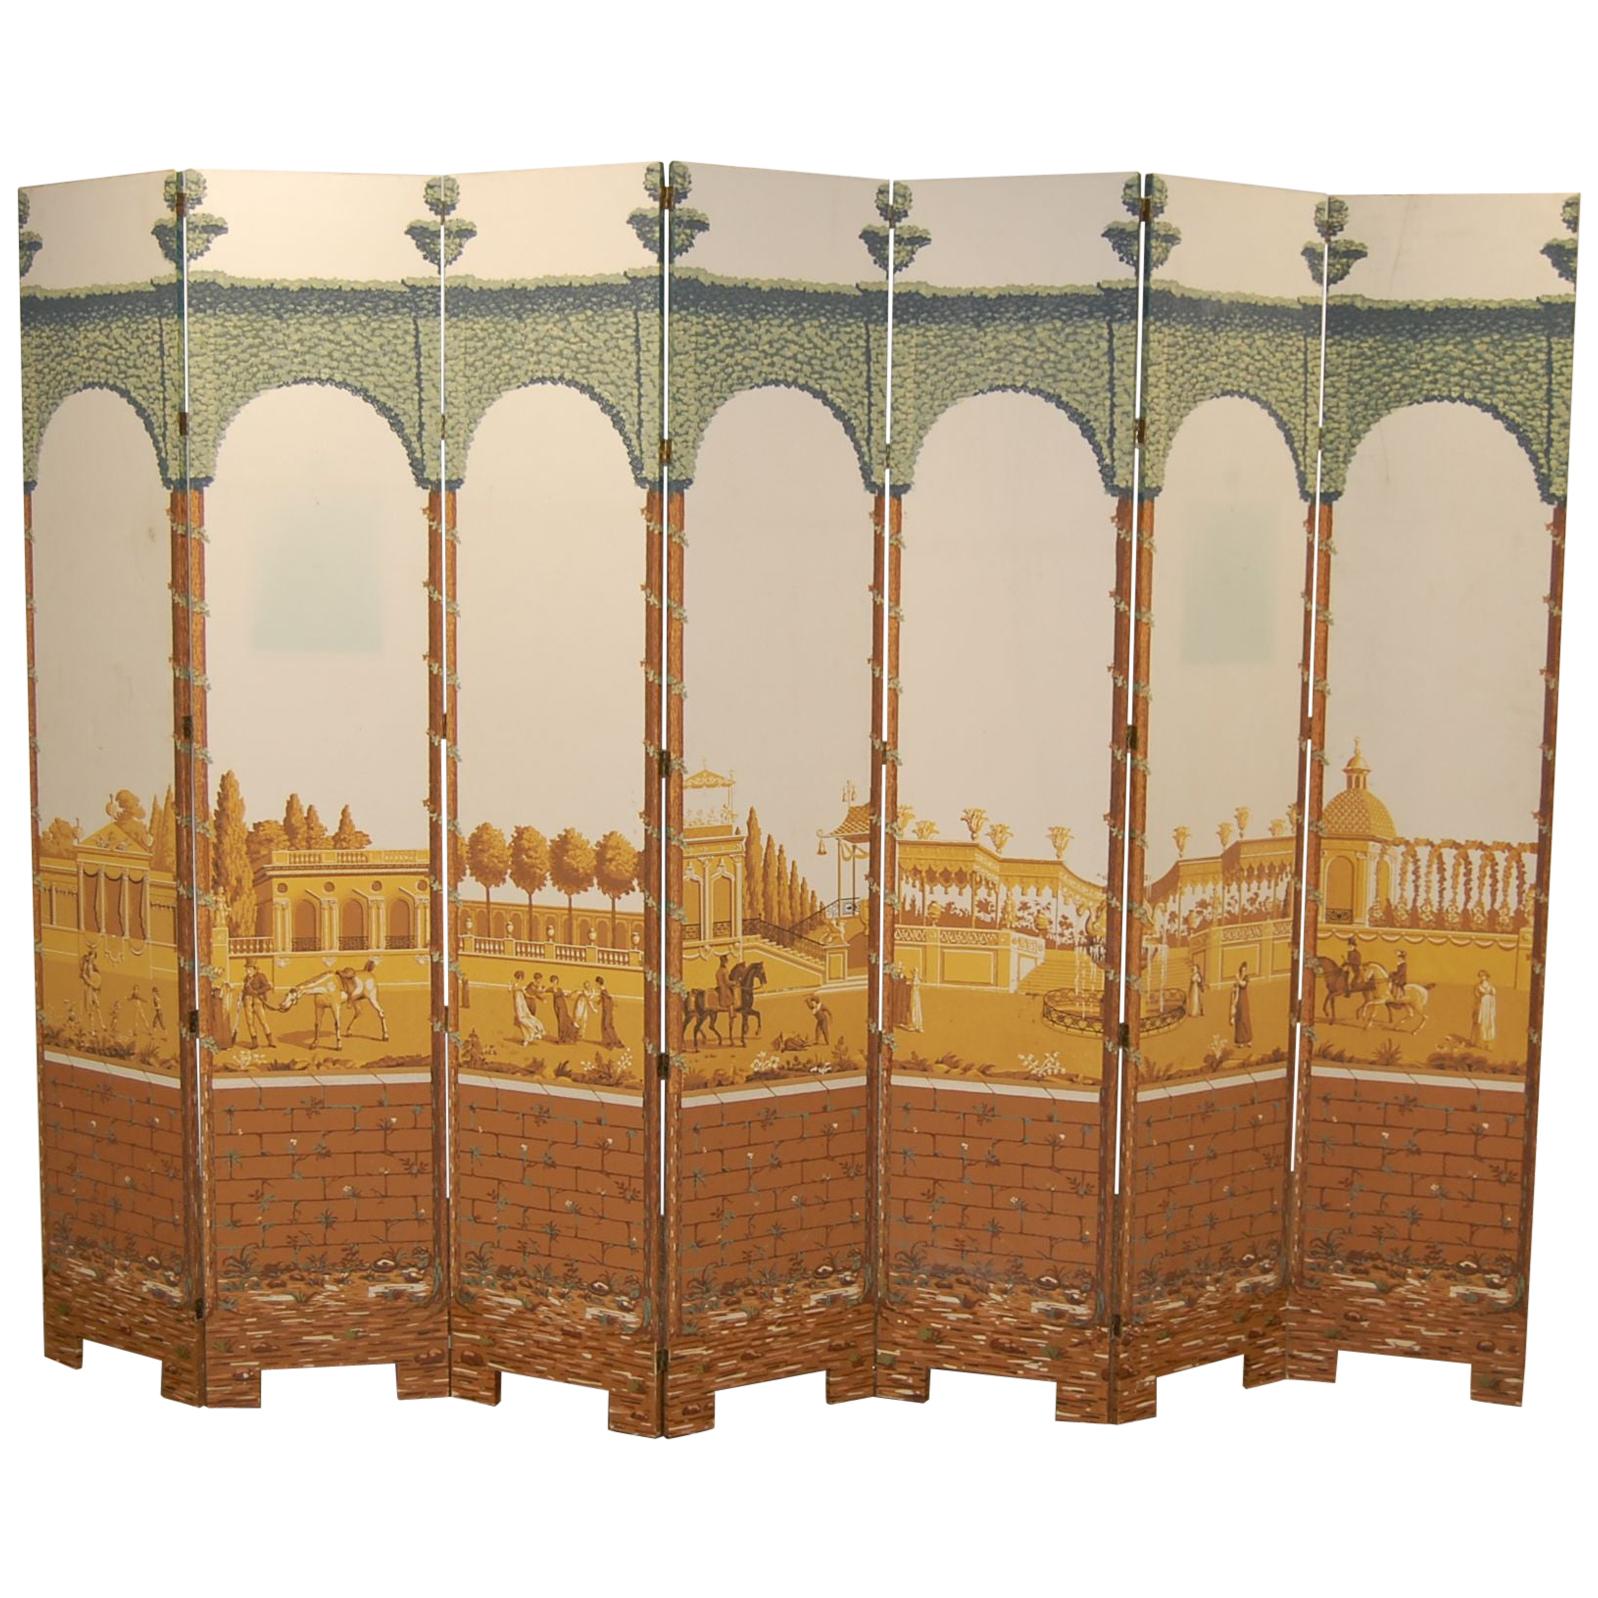 Seven-Panel Folding Screen Featuring Antique Printed Paper, circa 1924